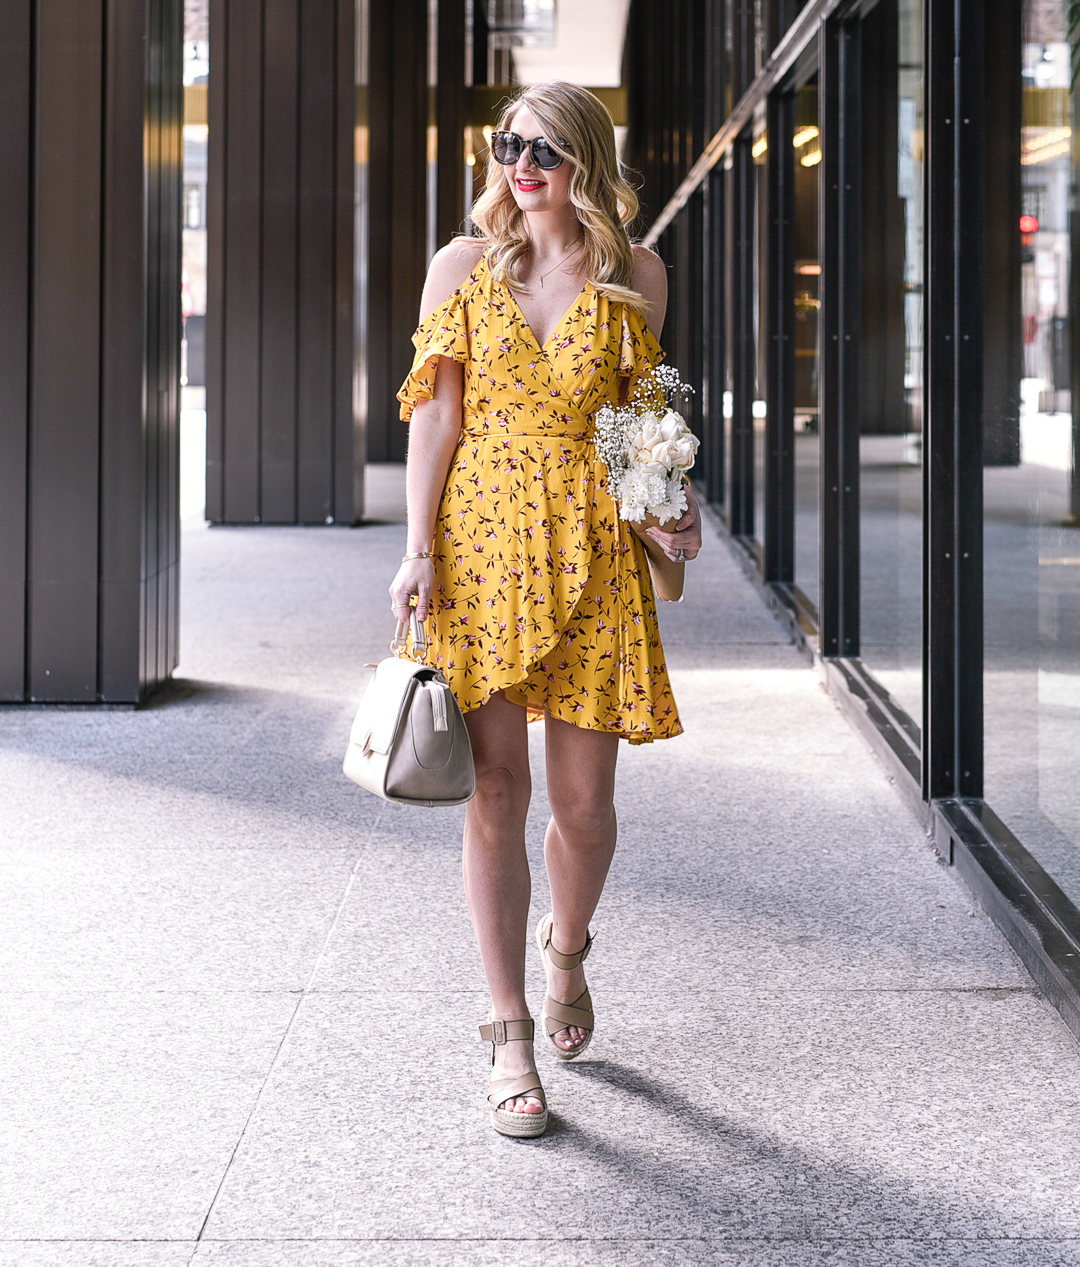 Mustard yellow floral wrap dress with Sole Society Audrina sandals.